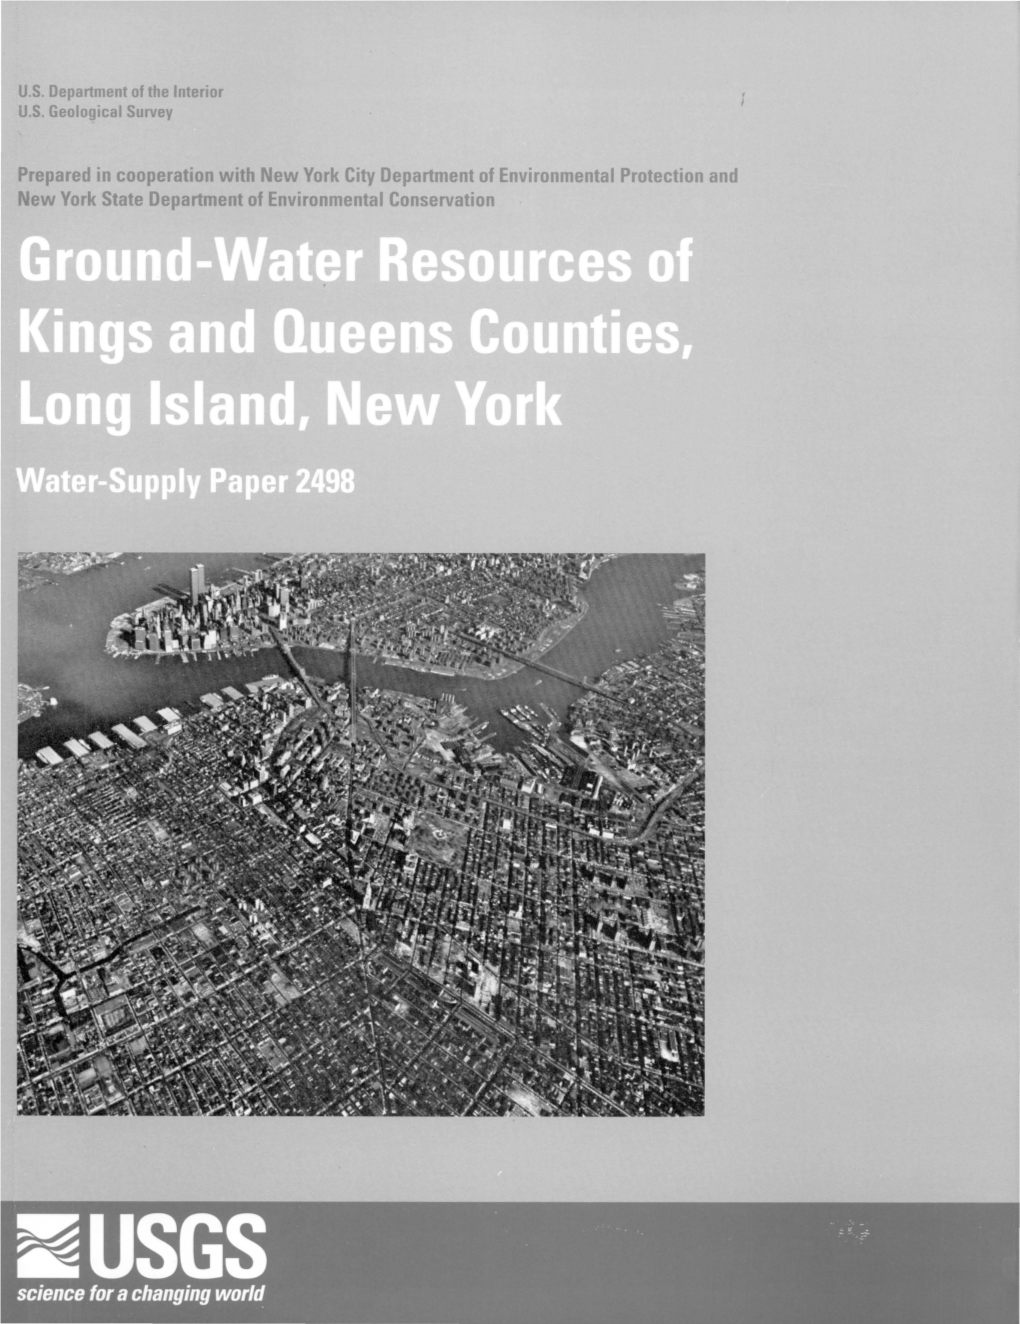 Ground-Water Resources of Kings and Queens Counties, Long Island, New York